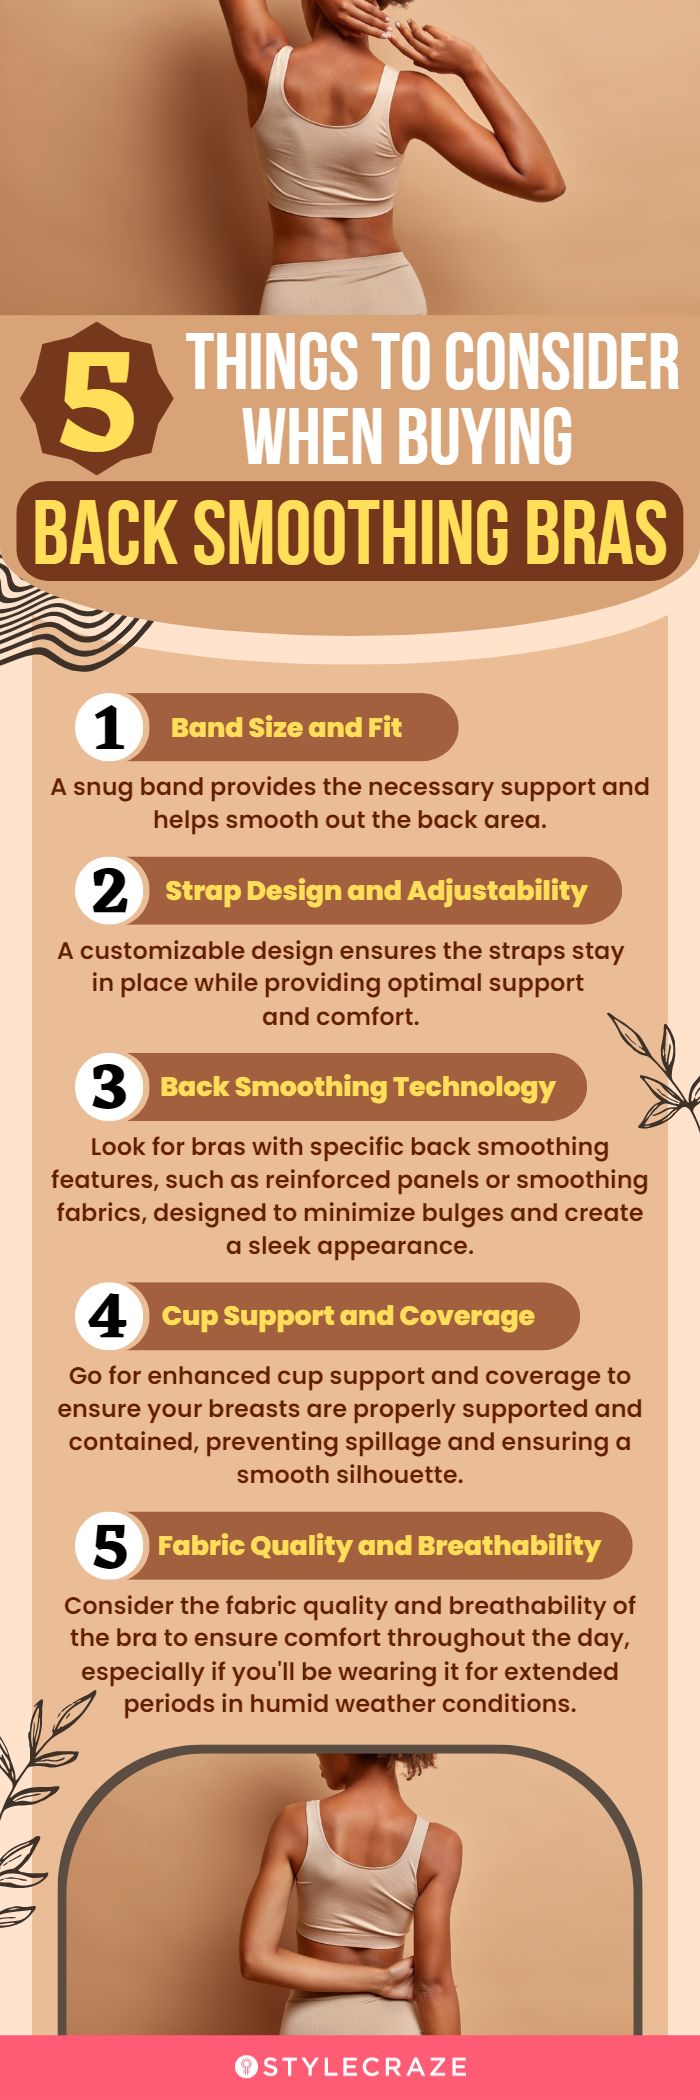 5 Things To Consider When Buying Back Smoothing Bras (infographic)